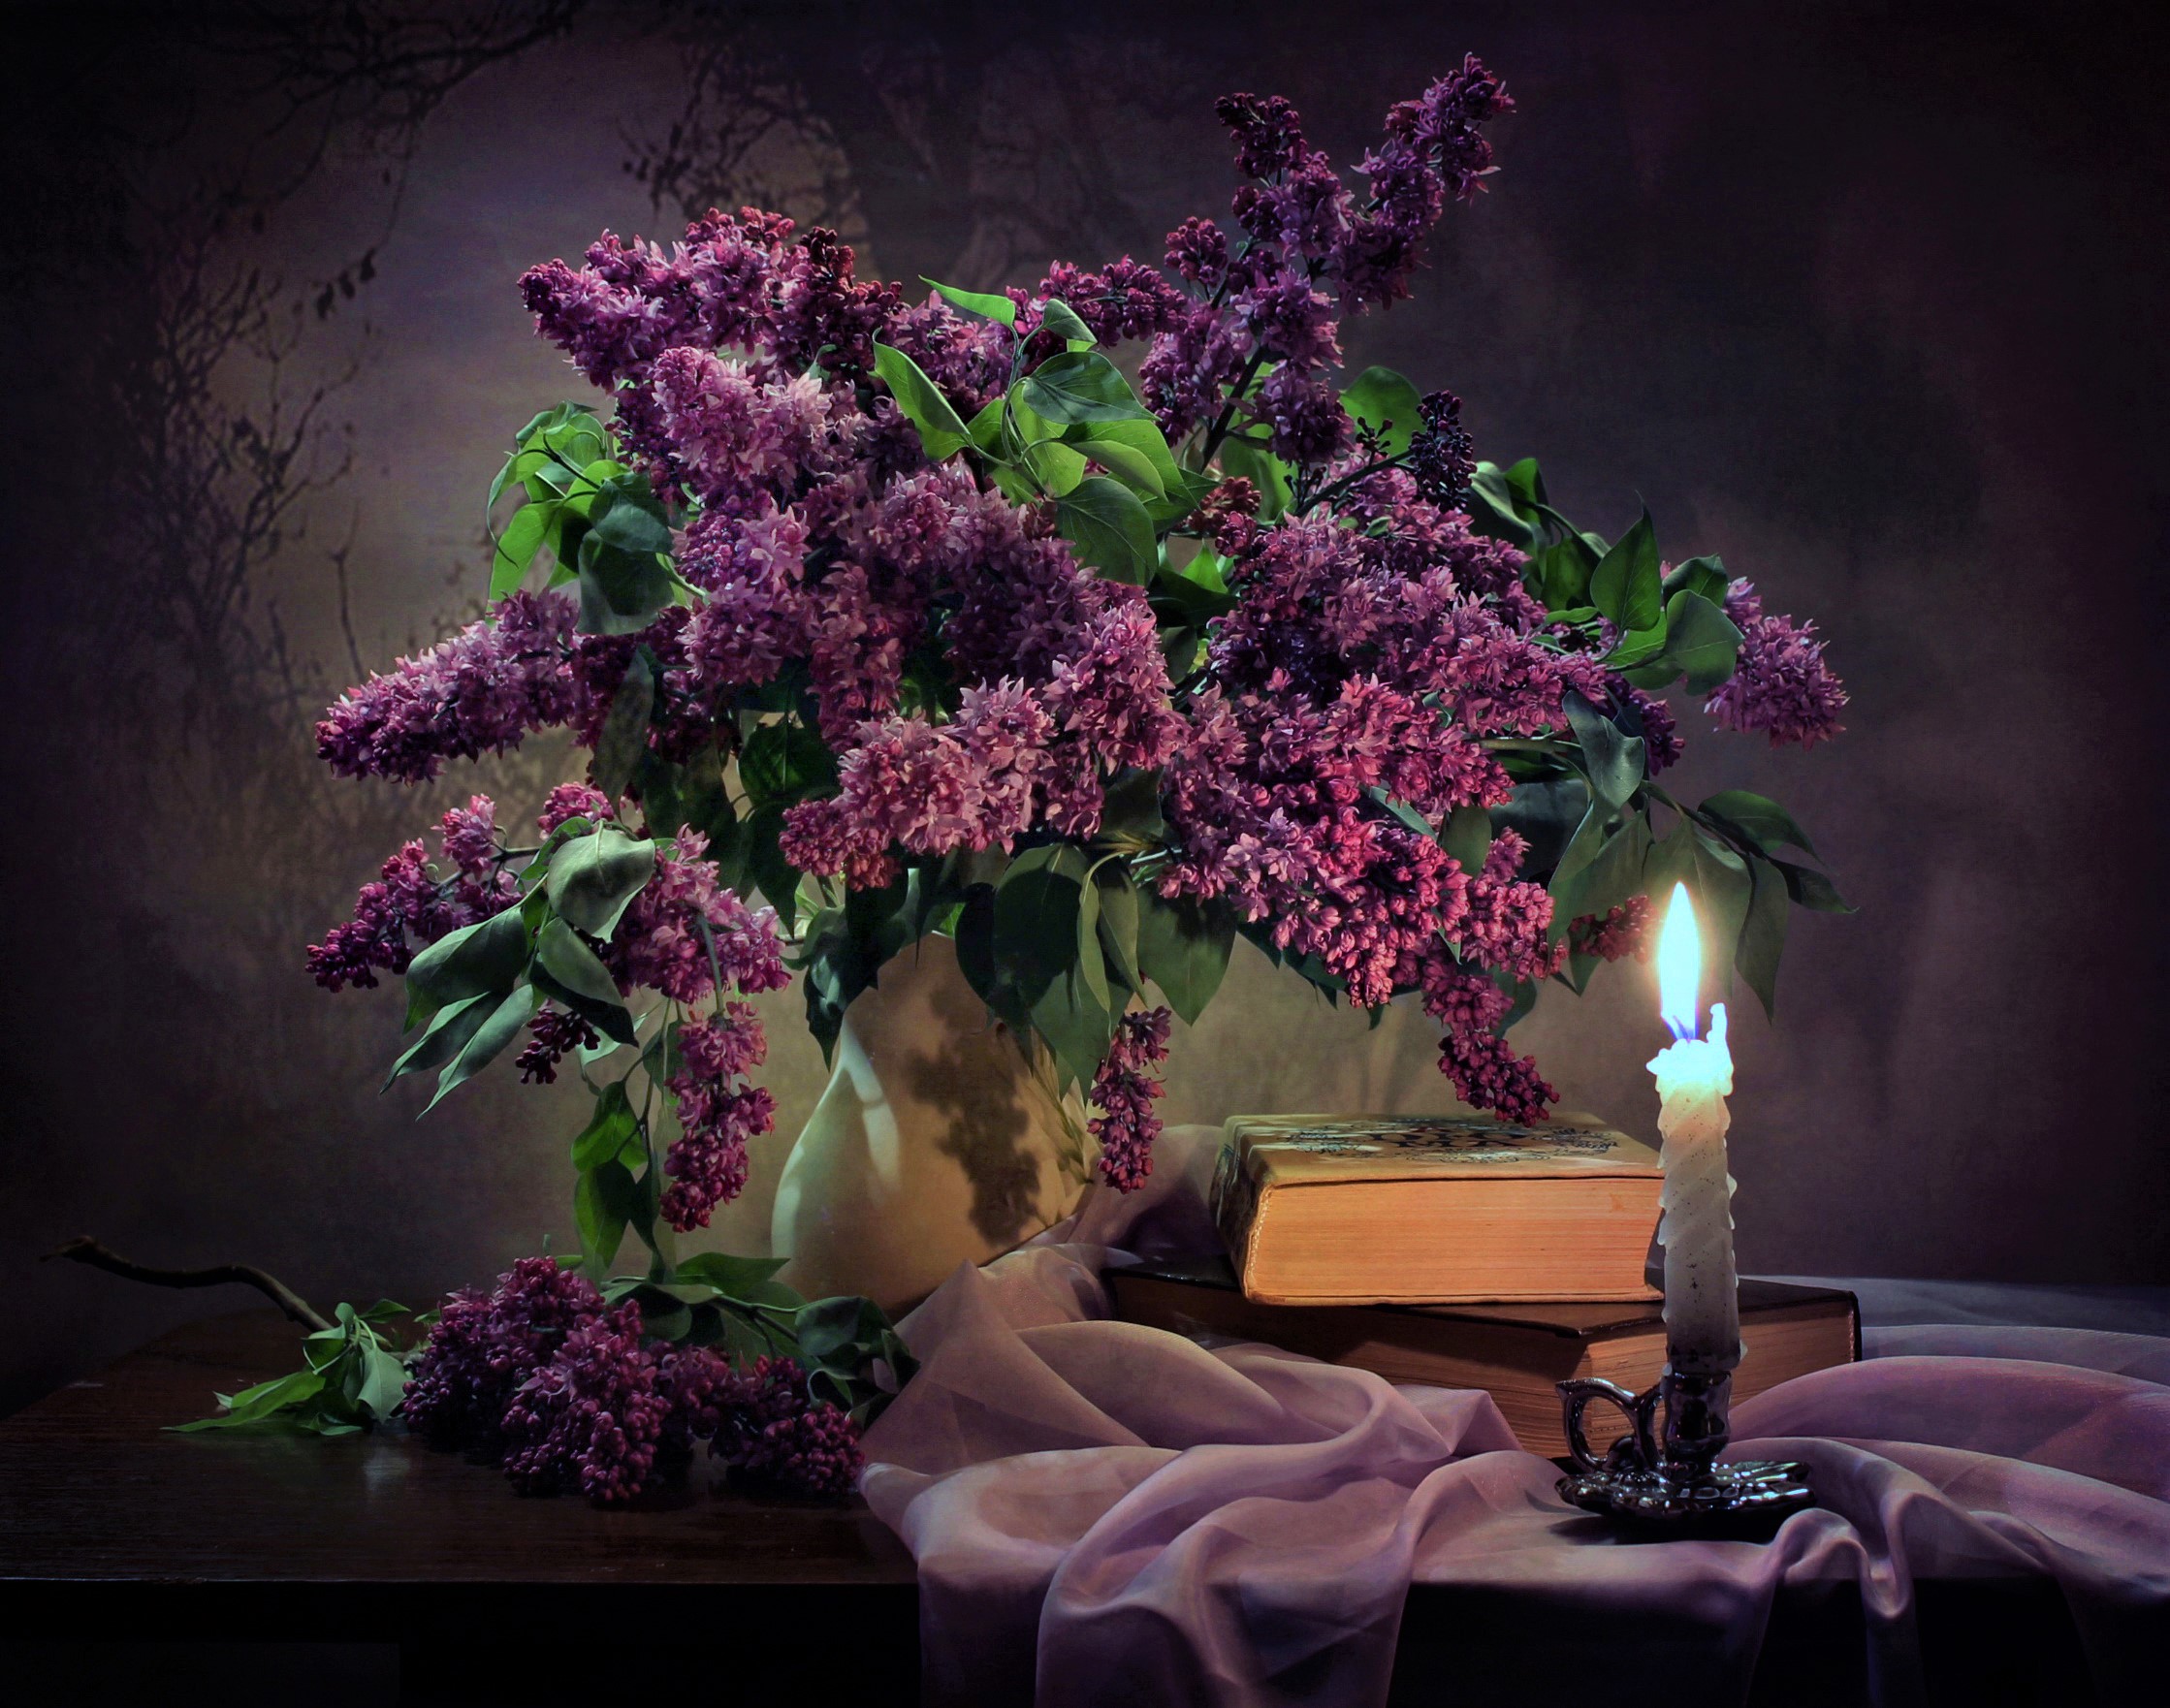 Book Candle Lilac Pink Flower Scarf Still Life Vase 2238x1762